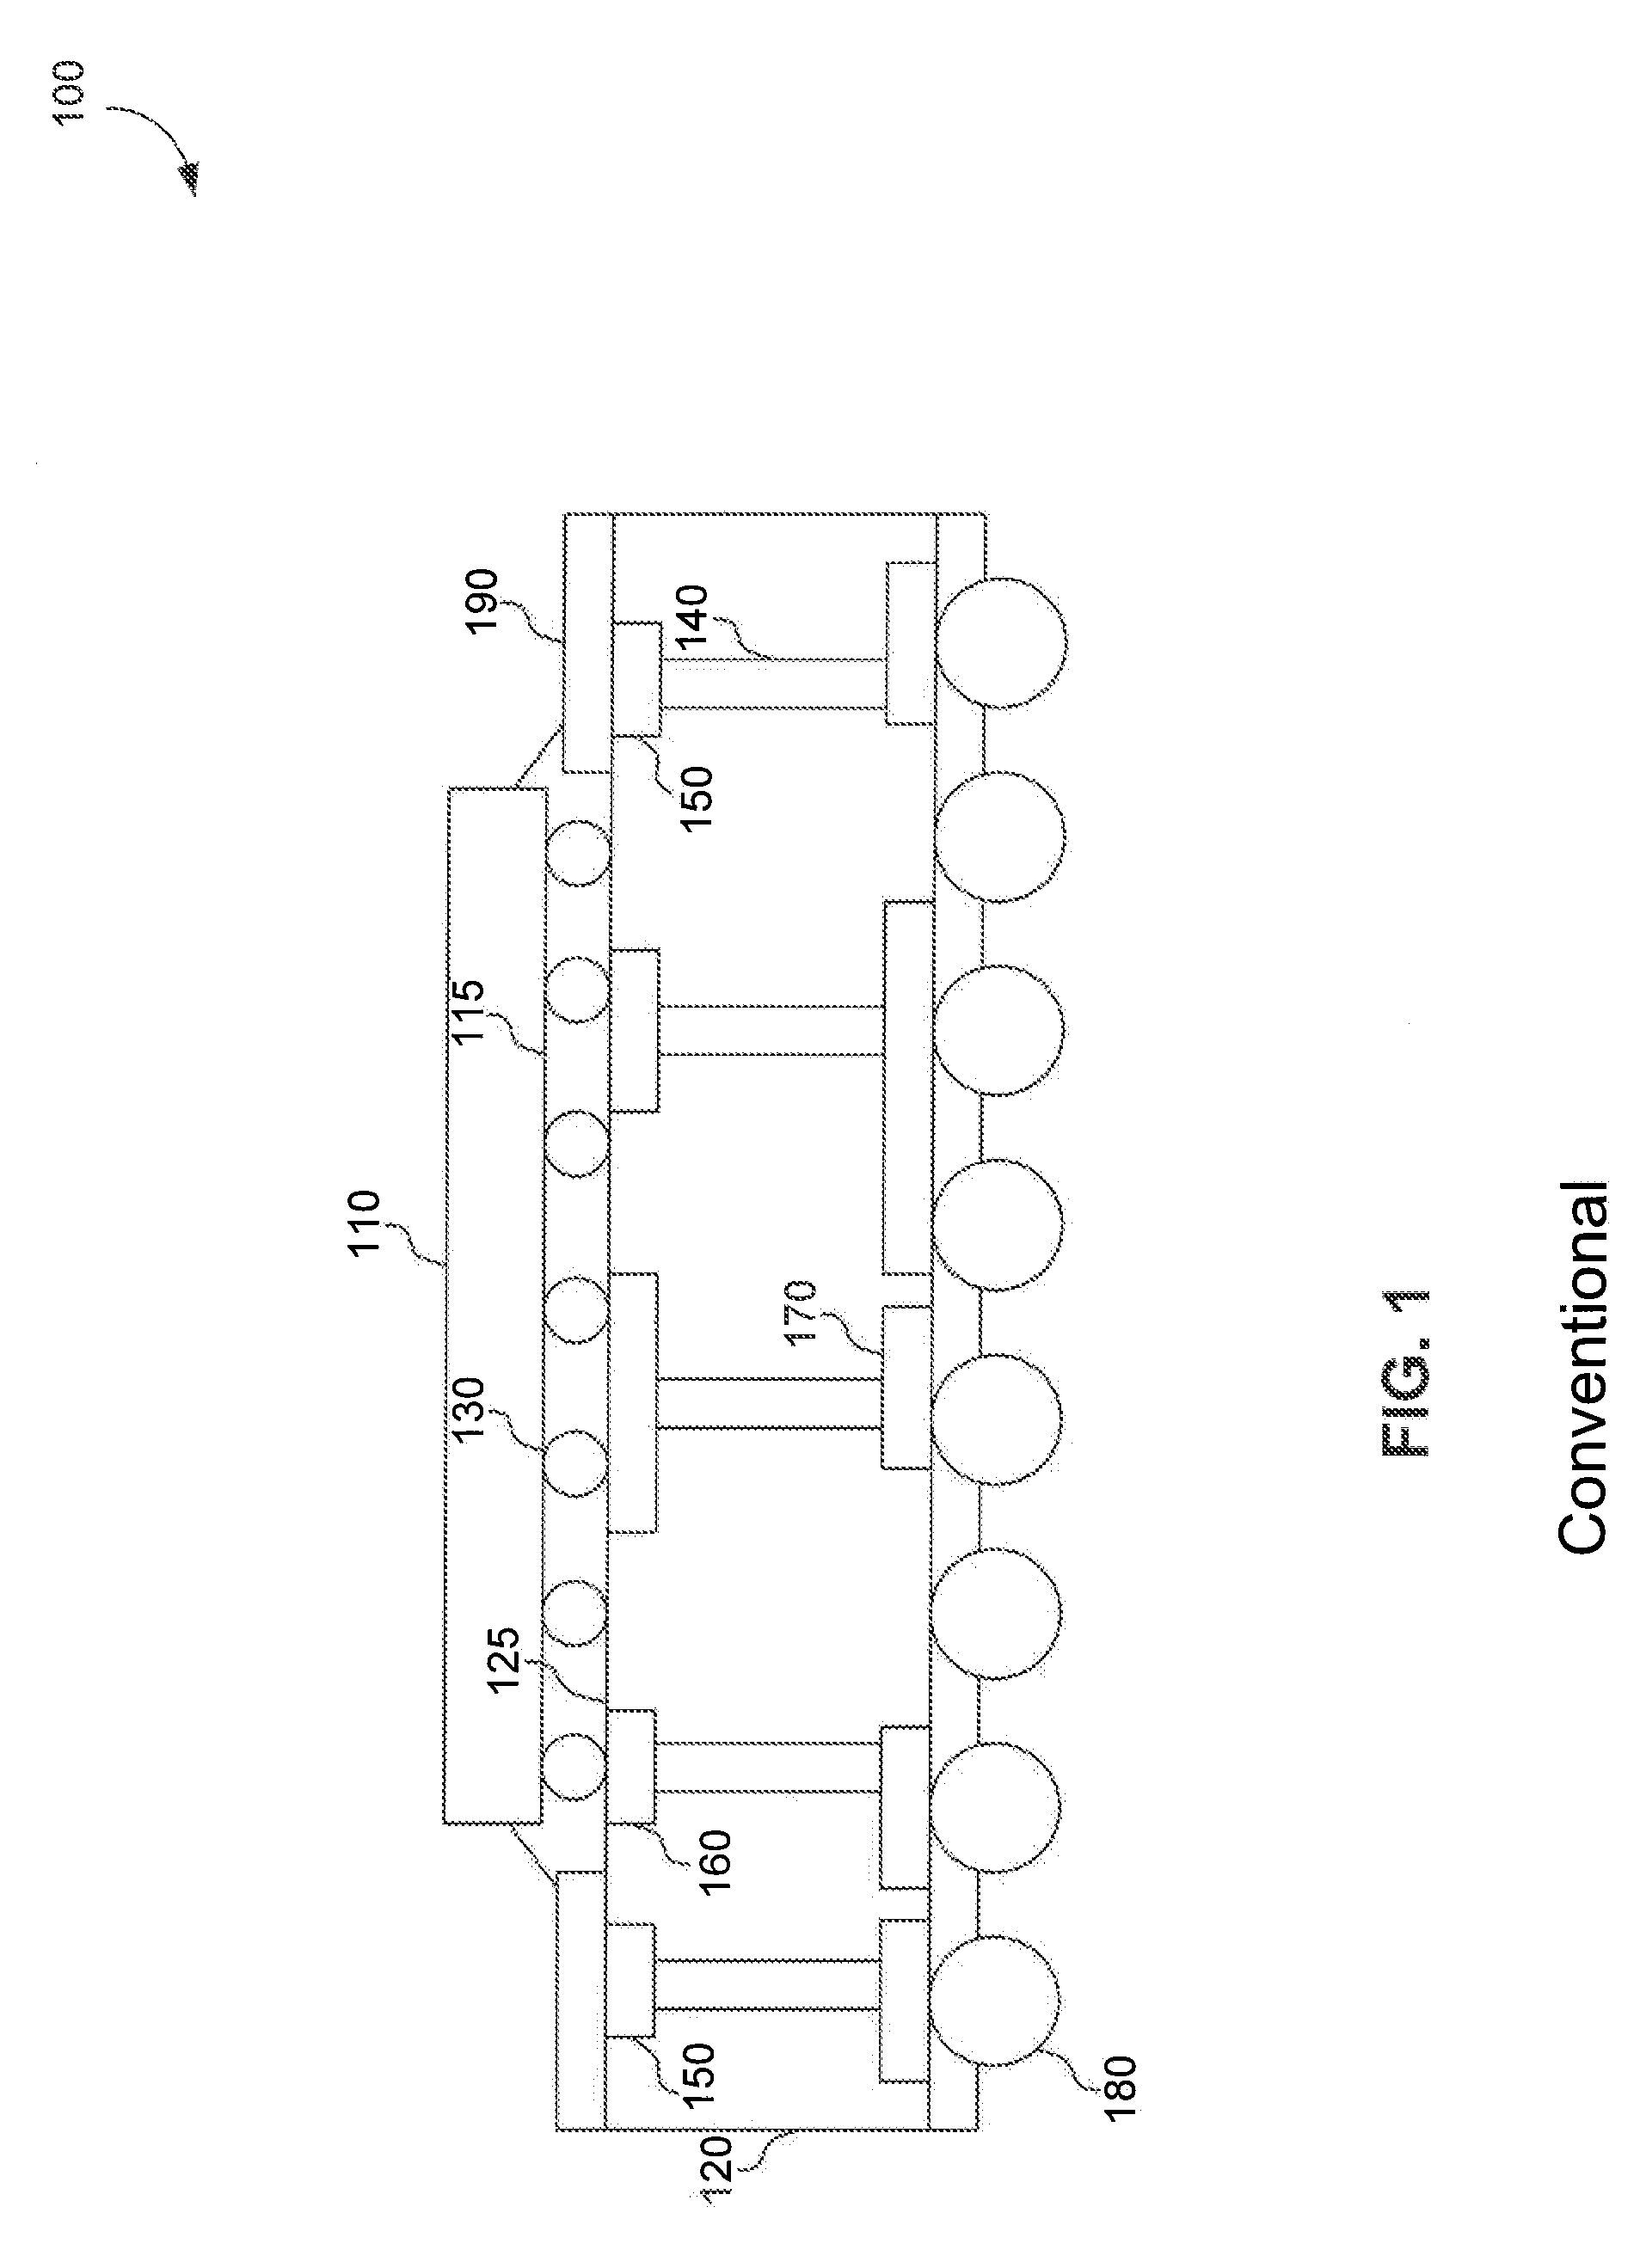 Package for a wireless enabled integrated circuit